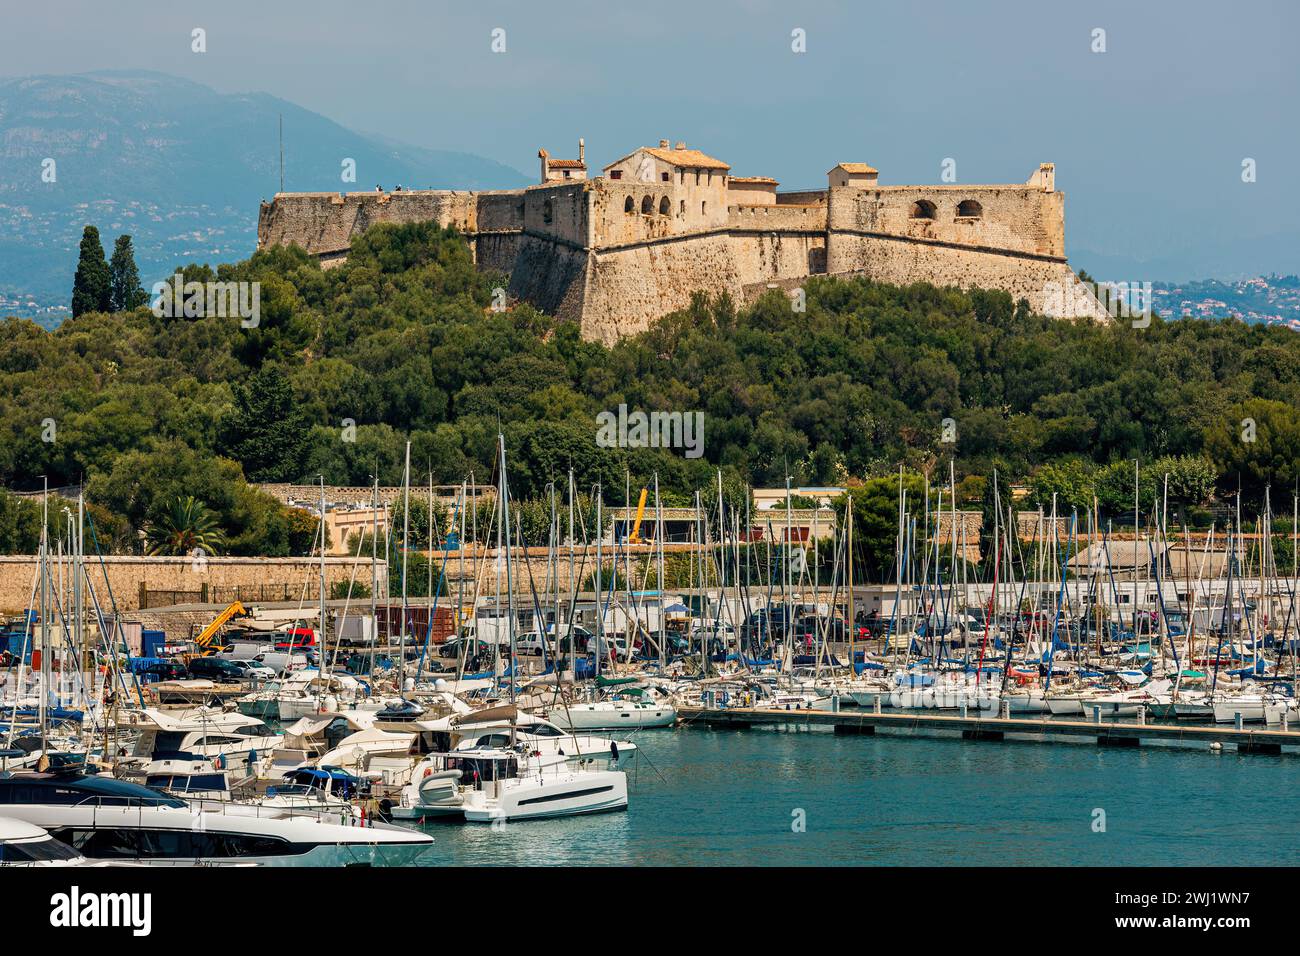 View of the famous Fort Carré and yachts at the Port Vauban in Antibes, France. Stock Photo